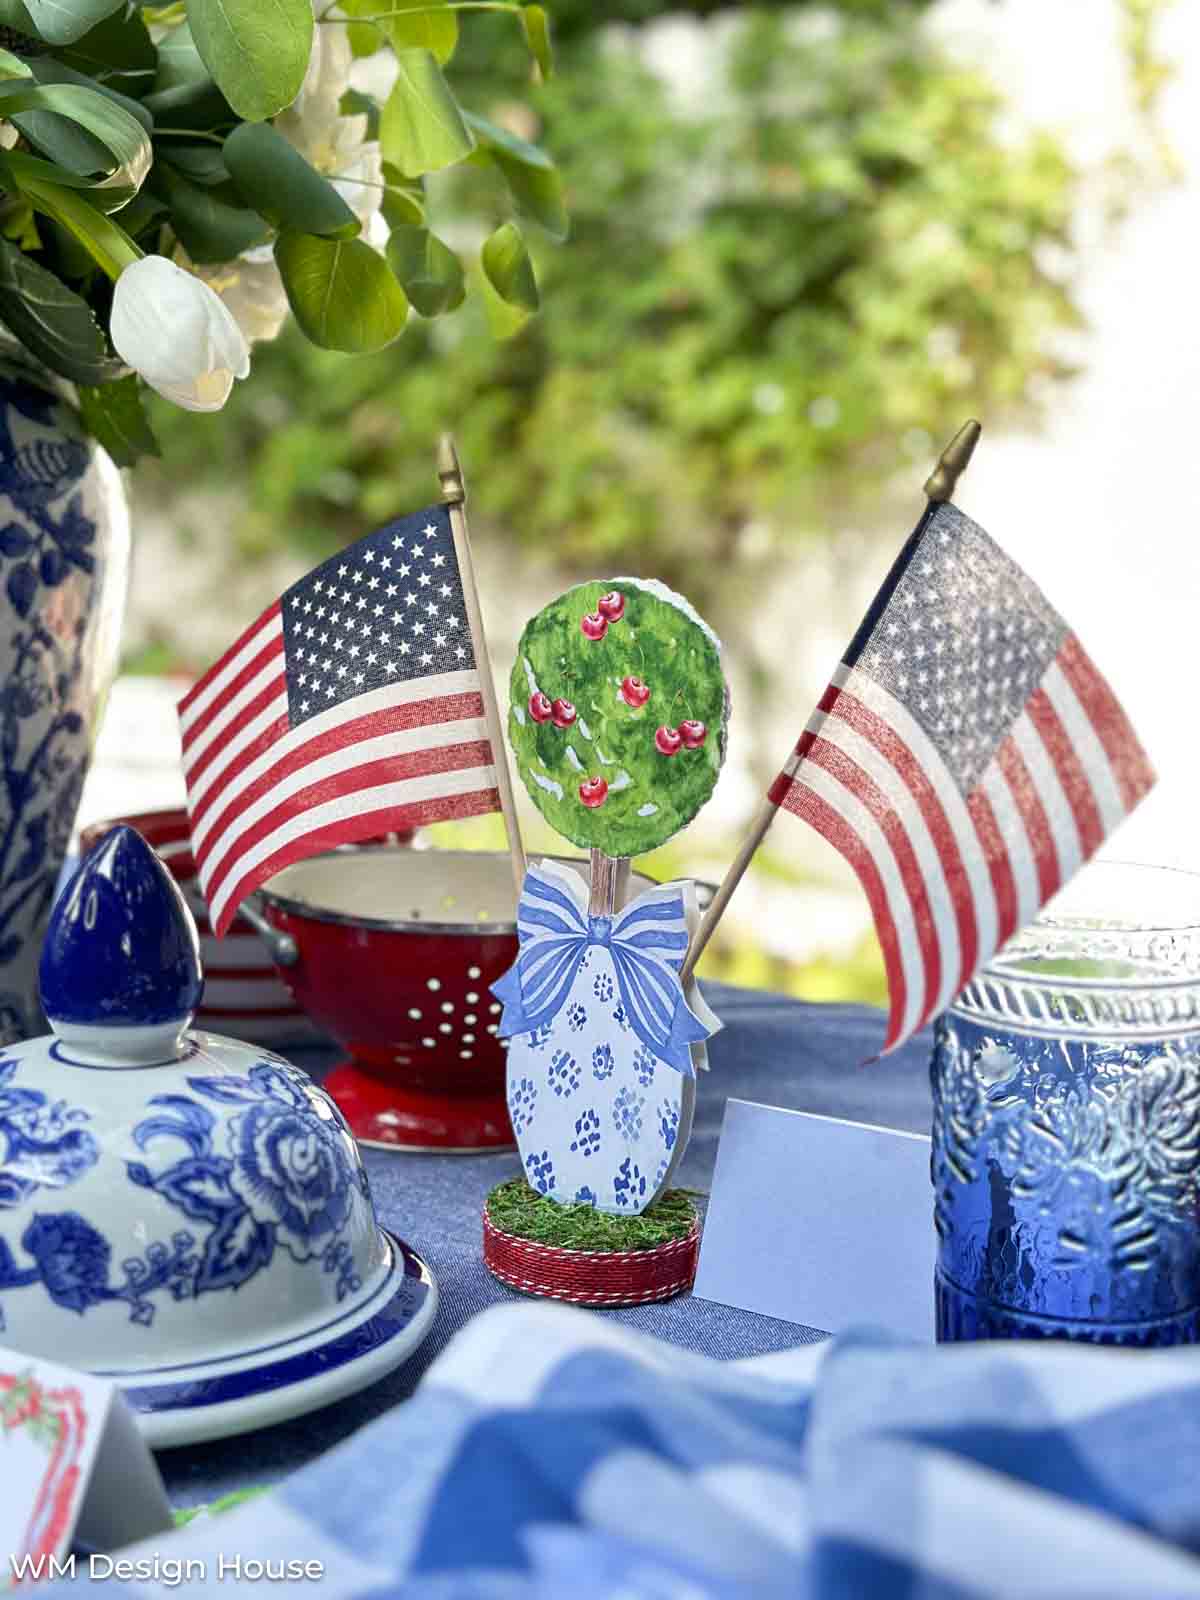 Patriotic decor Ideas and free printables for a 4th of July dinner party